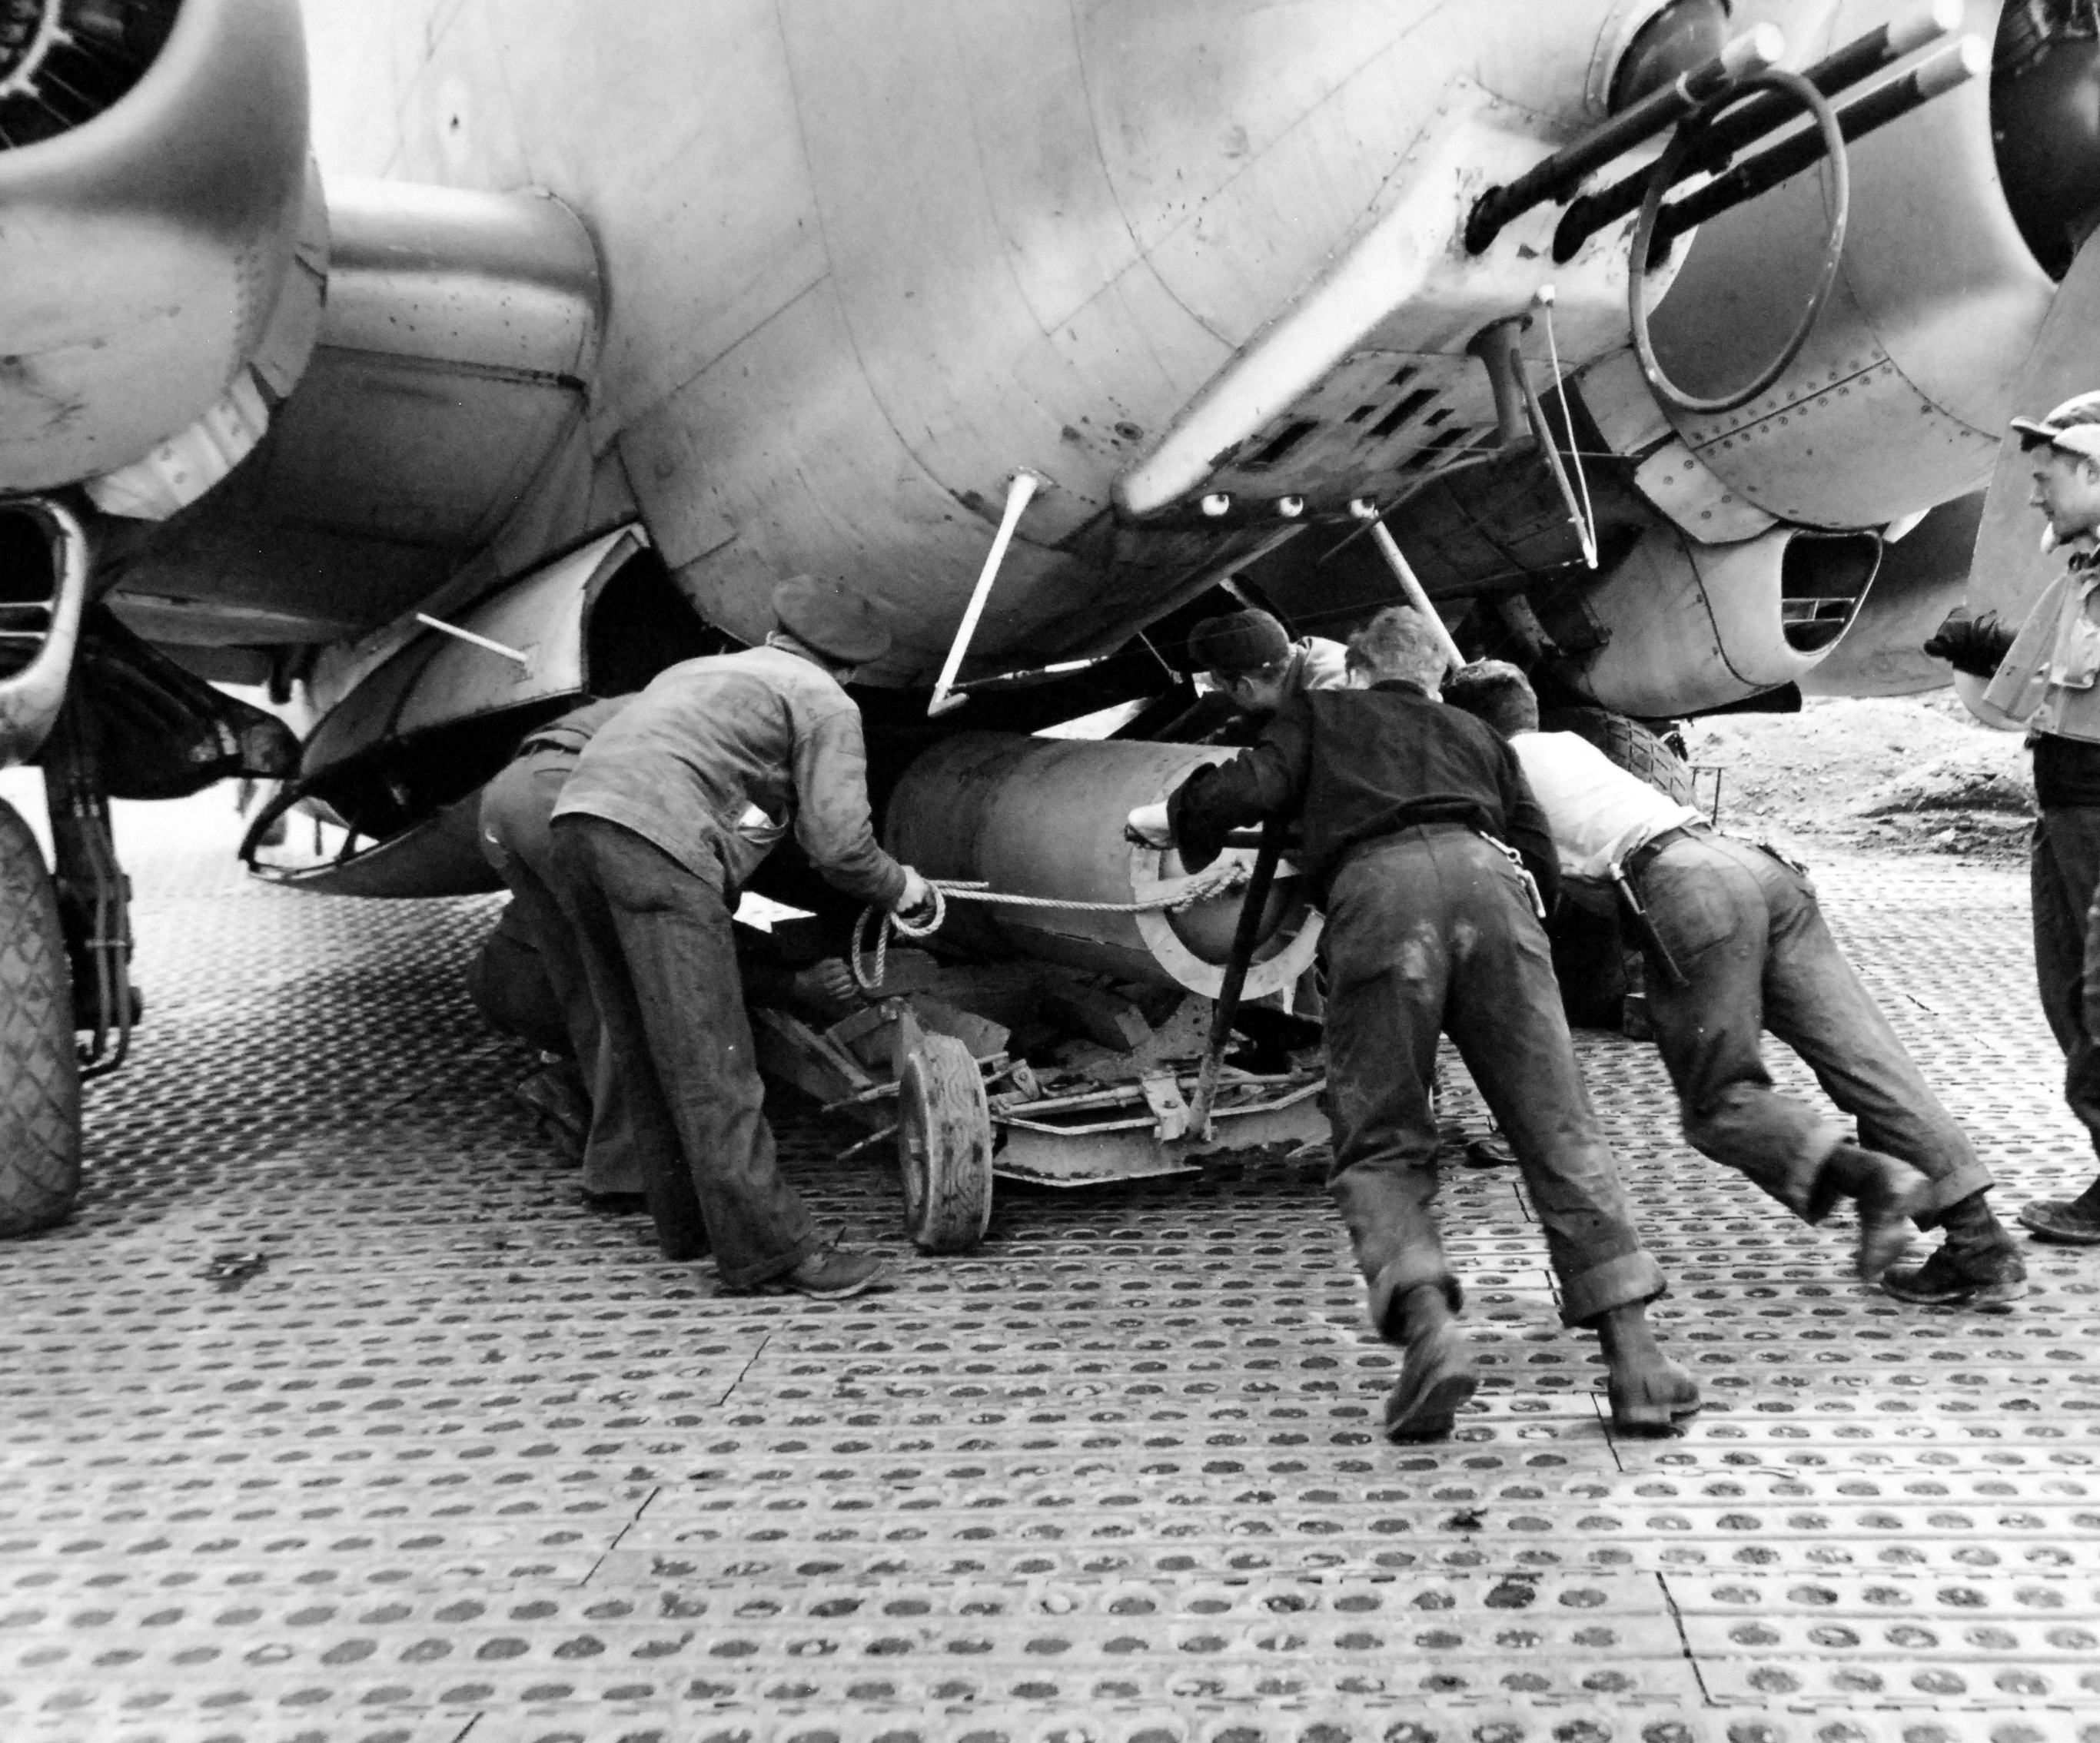 Mark XIII torpedo with wooden drag ring being loaded into a United States Navy PV-2 Harpoon of Patrol Bombing Squadron VPB-139 at Casco Field, Attu Island, Aleutians, Alaska, 7 Apr 1945. Note the Marsden Matting.